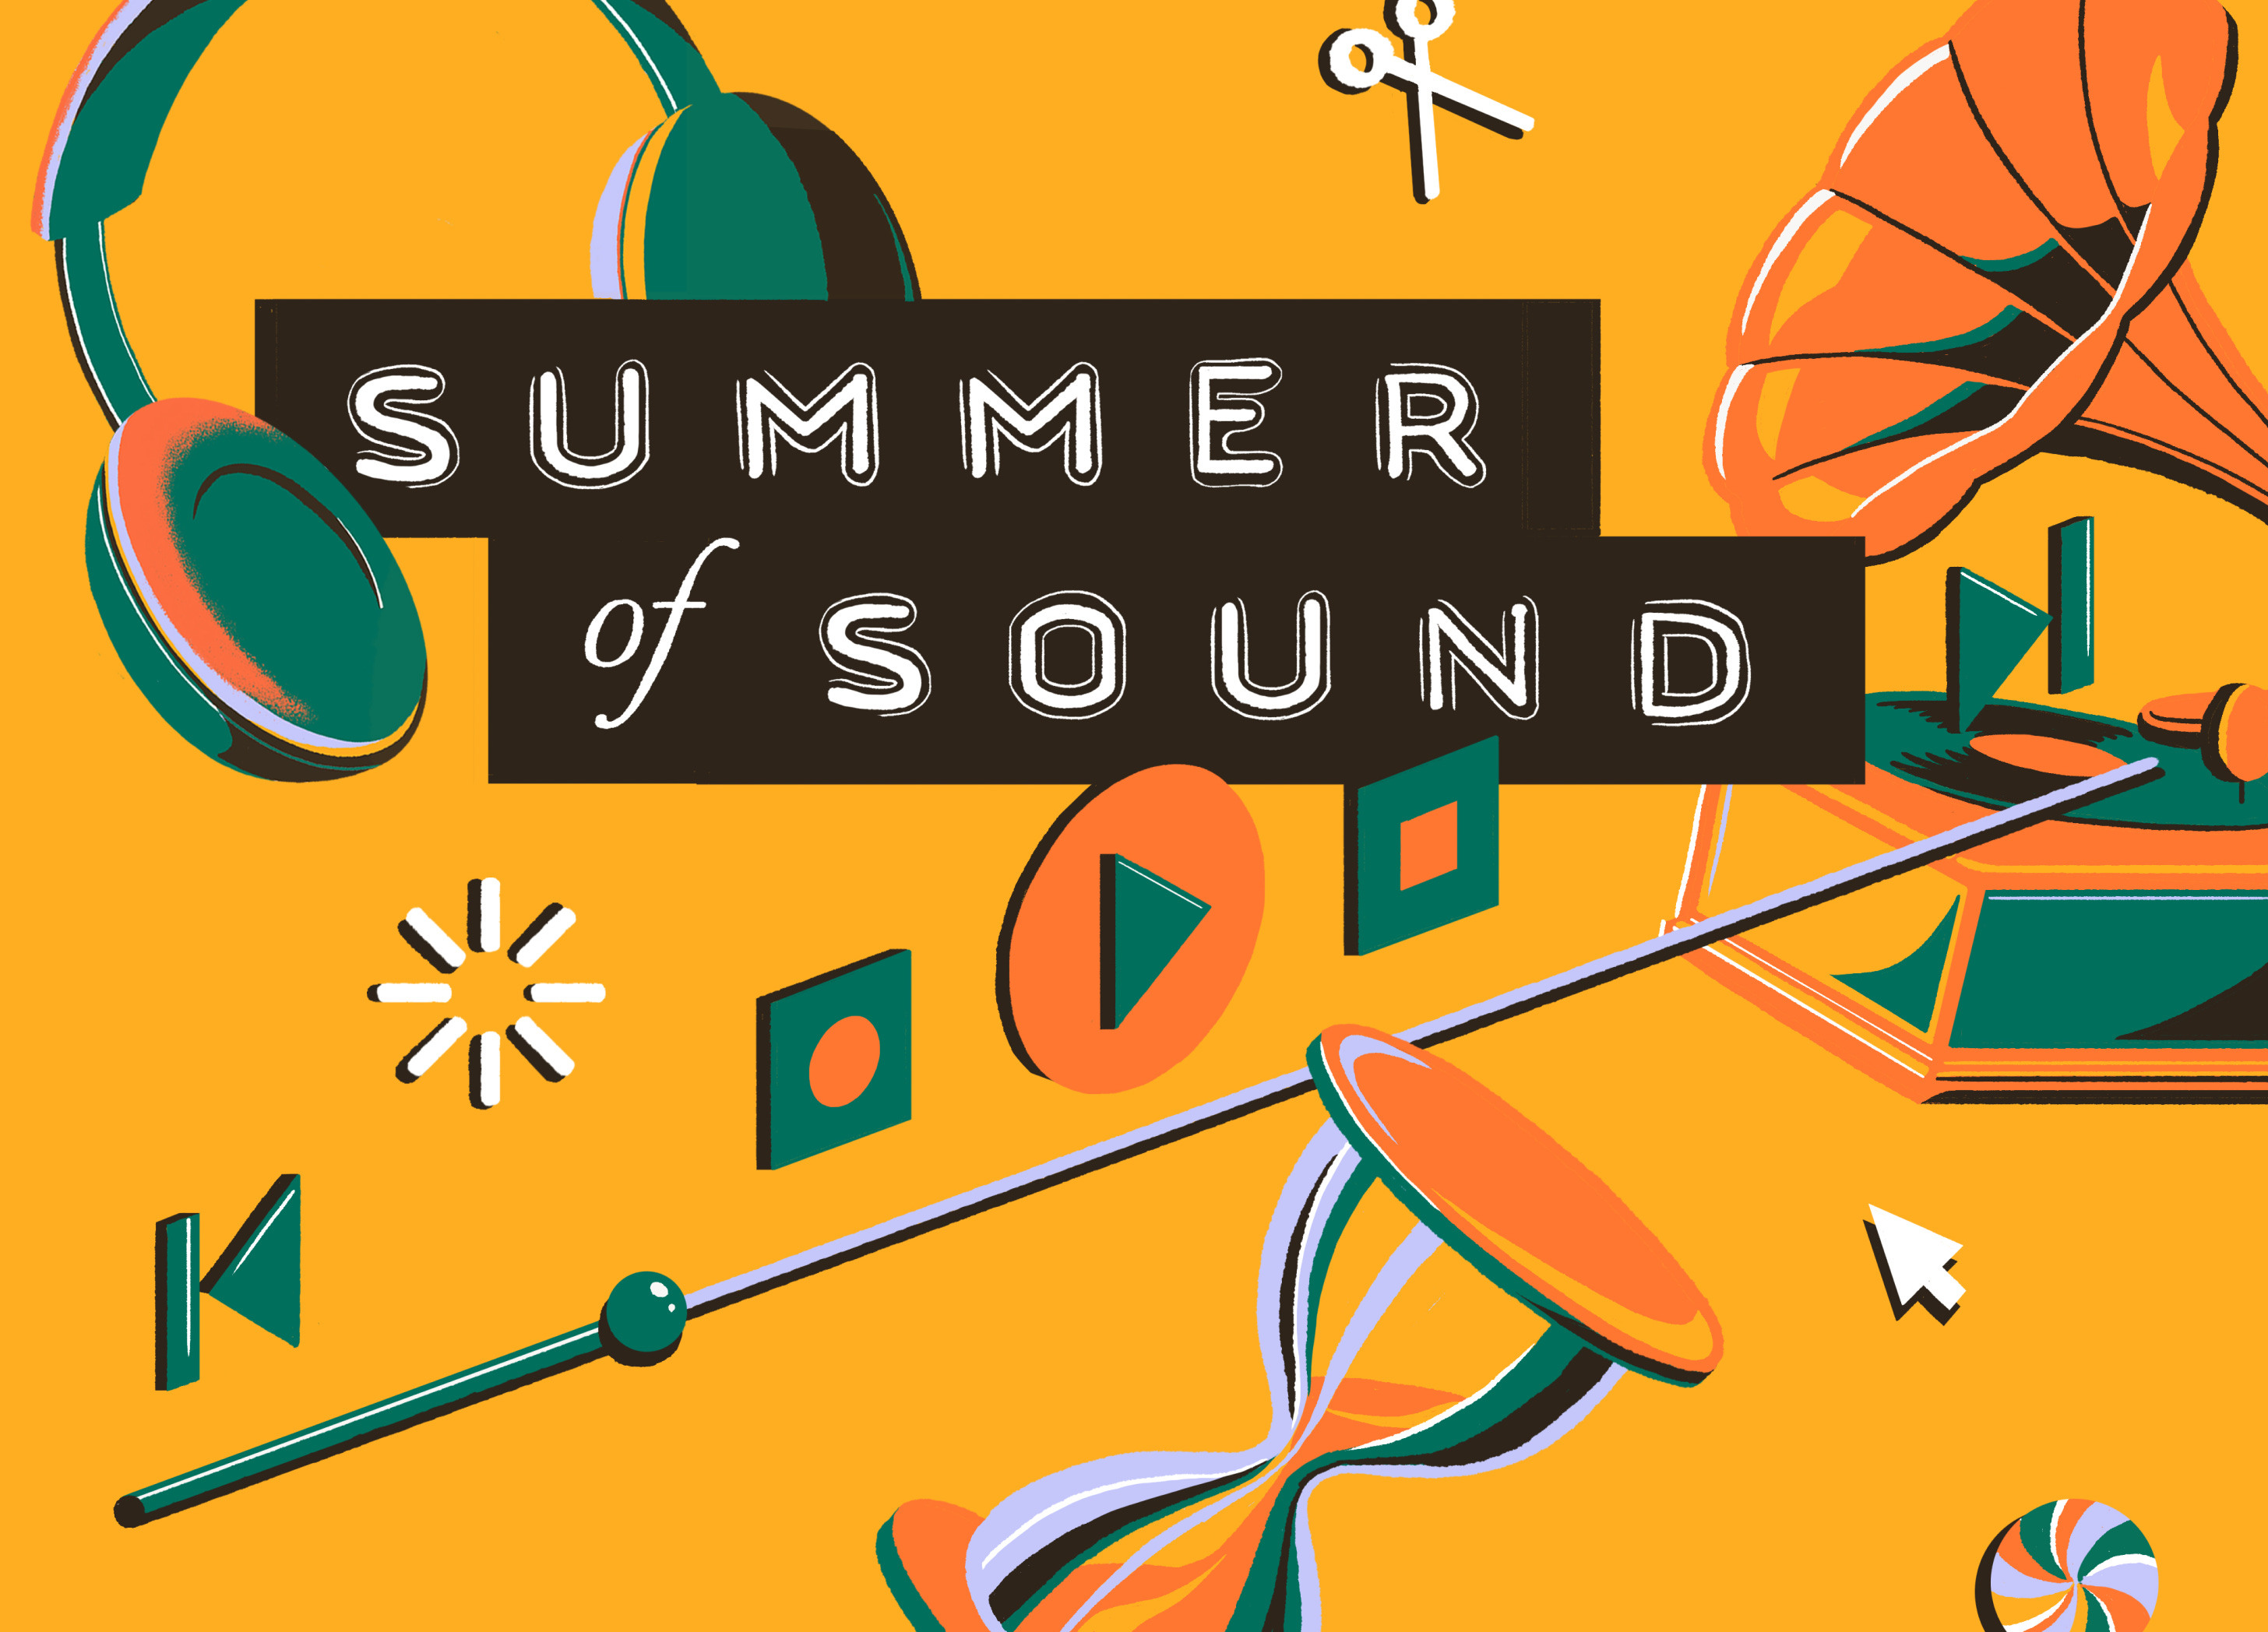 Listen up! Summer of Sound applications are open